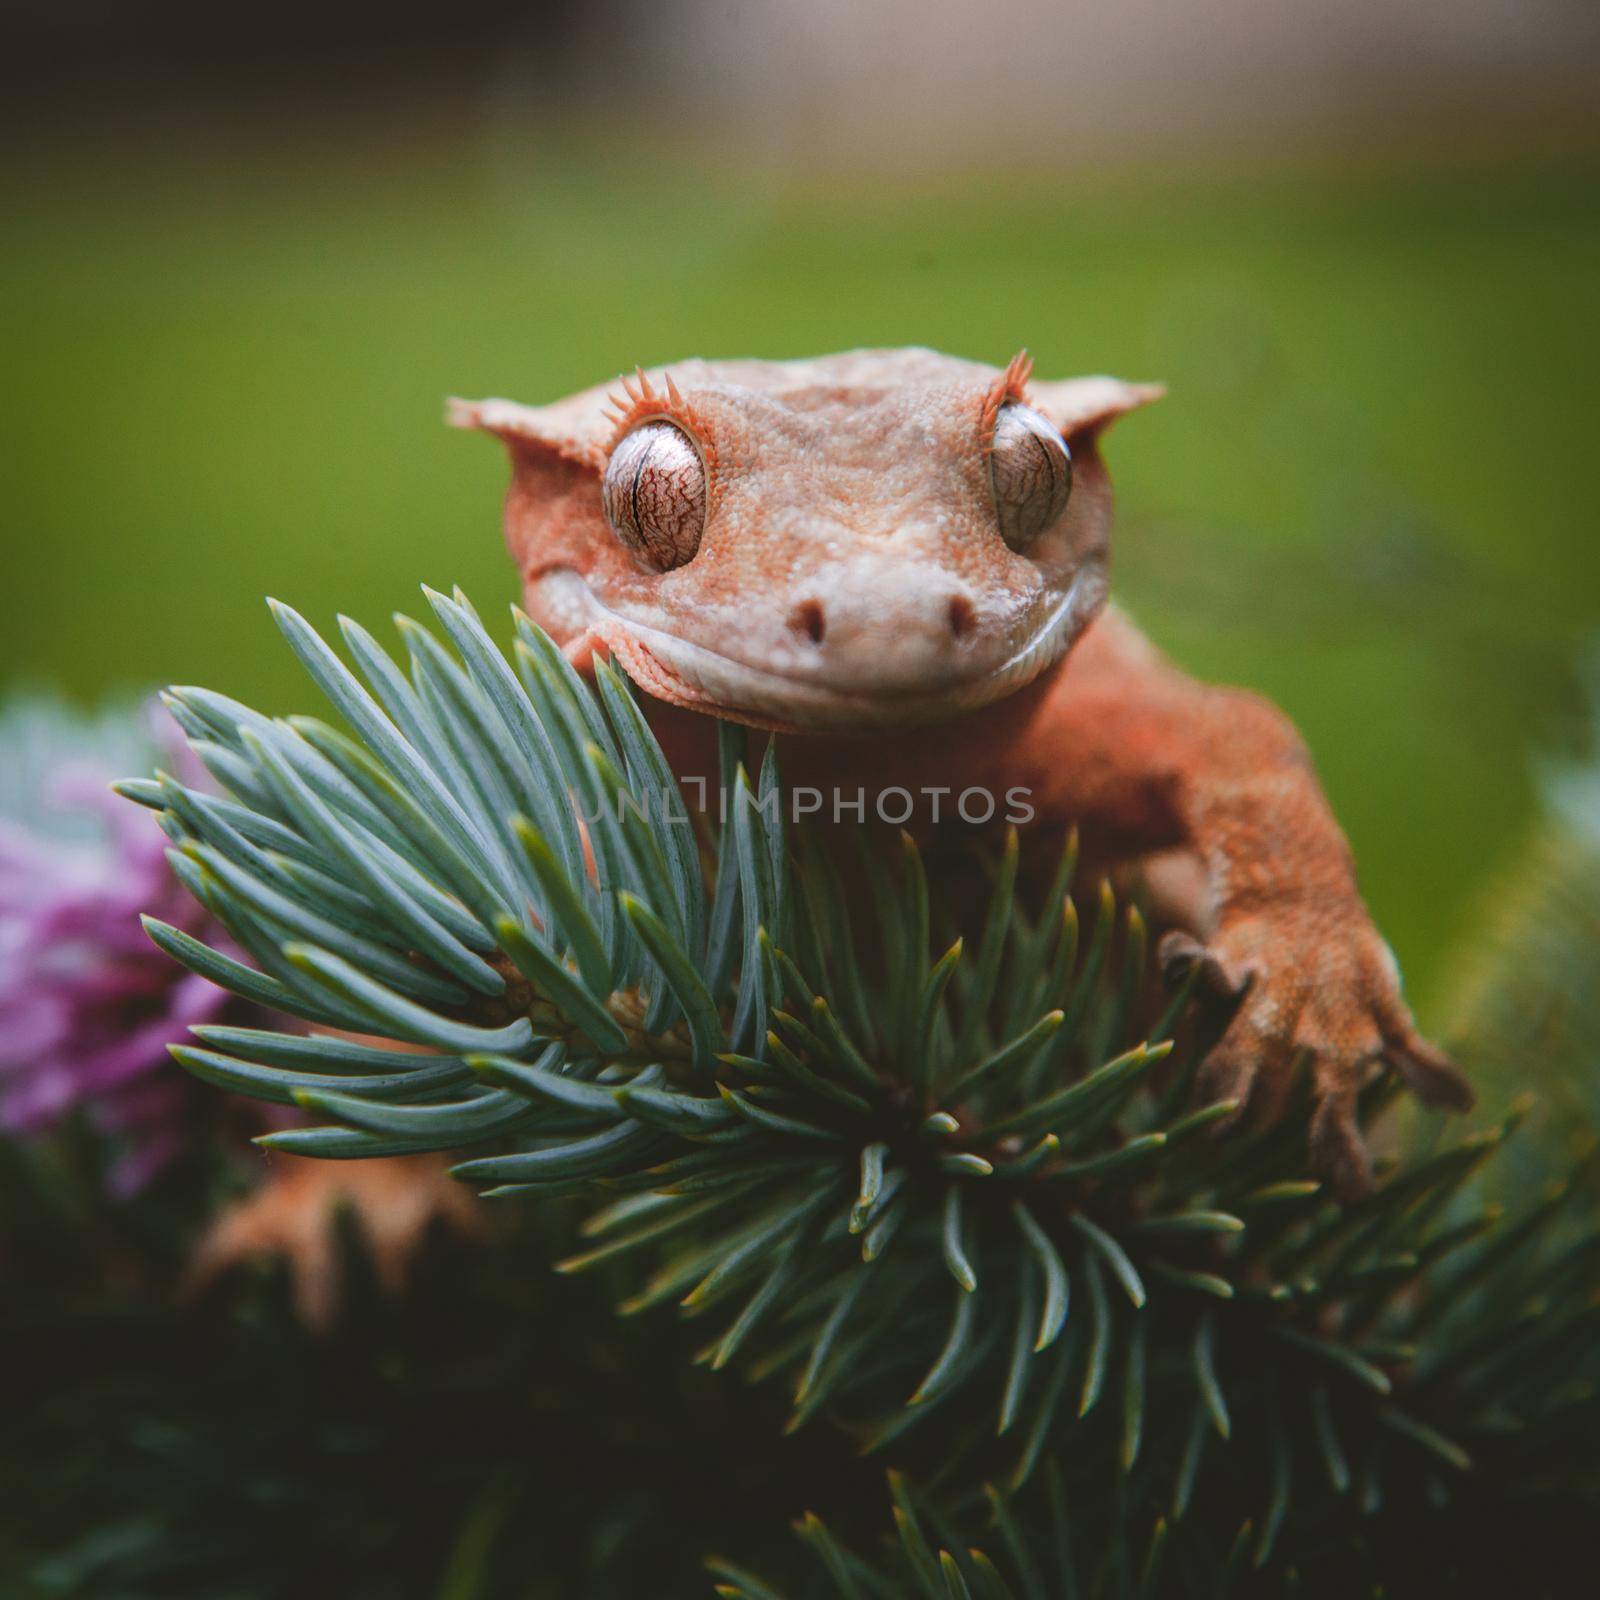 New Caledonian crested gecko, Rhacodactylus ciliatus, on tree with flowers